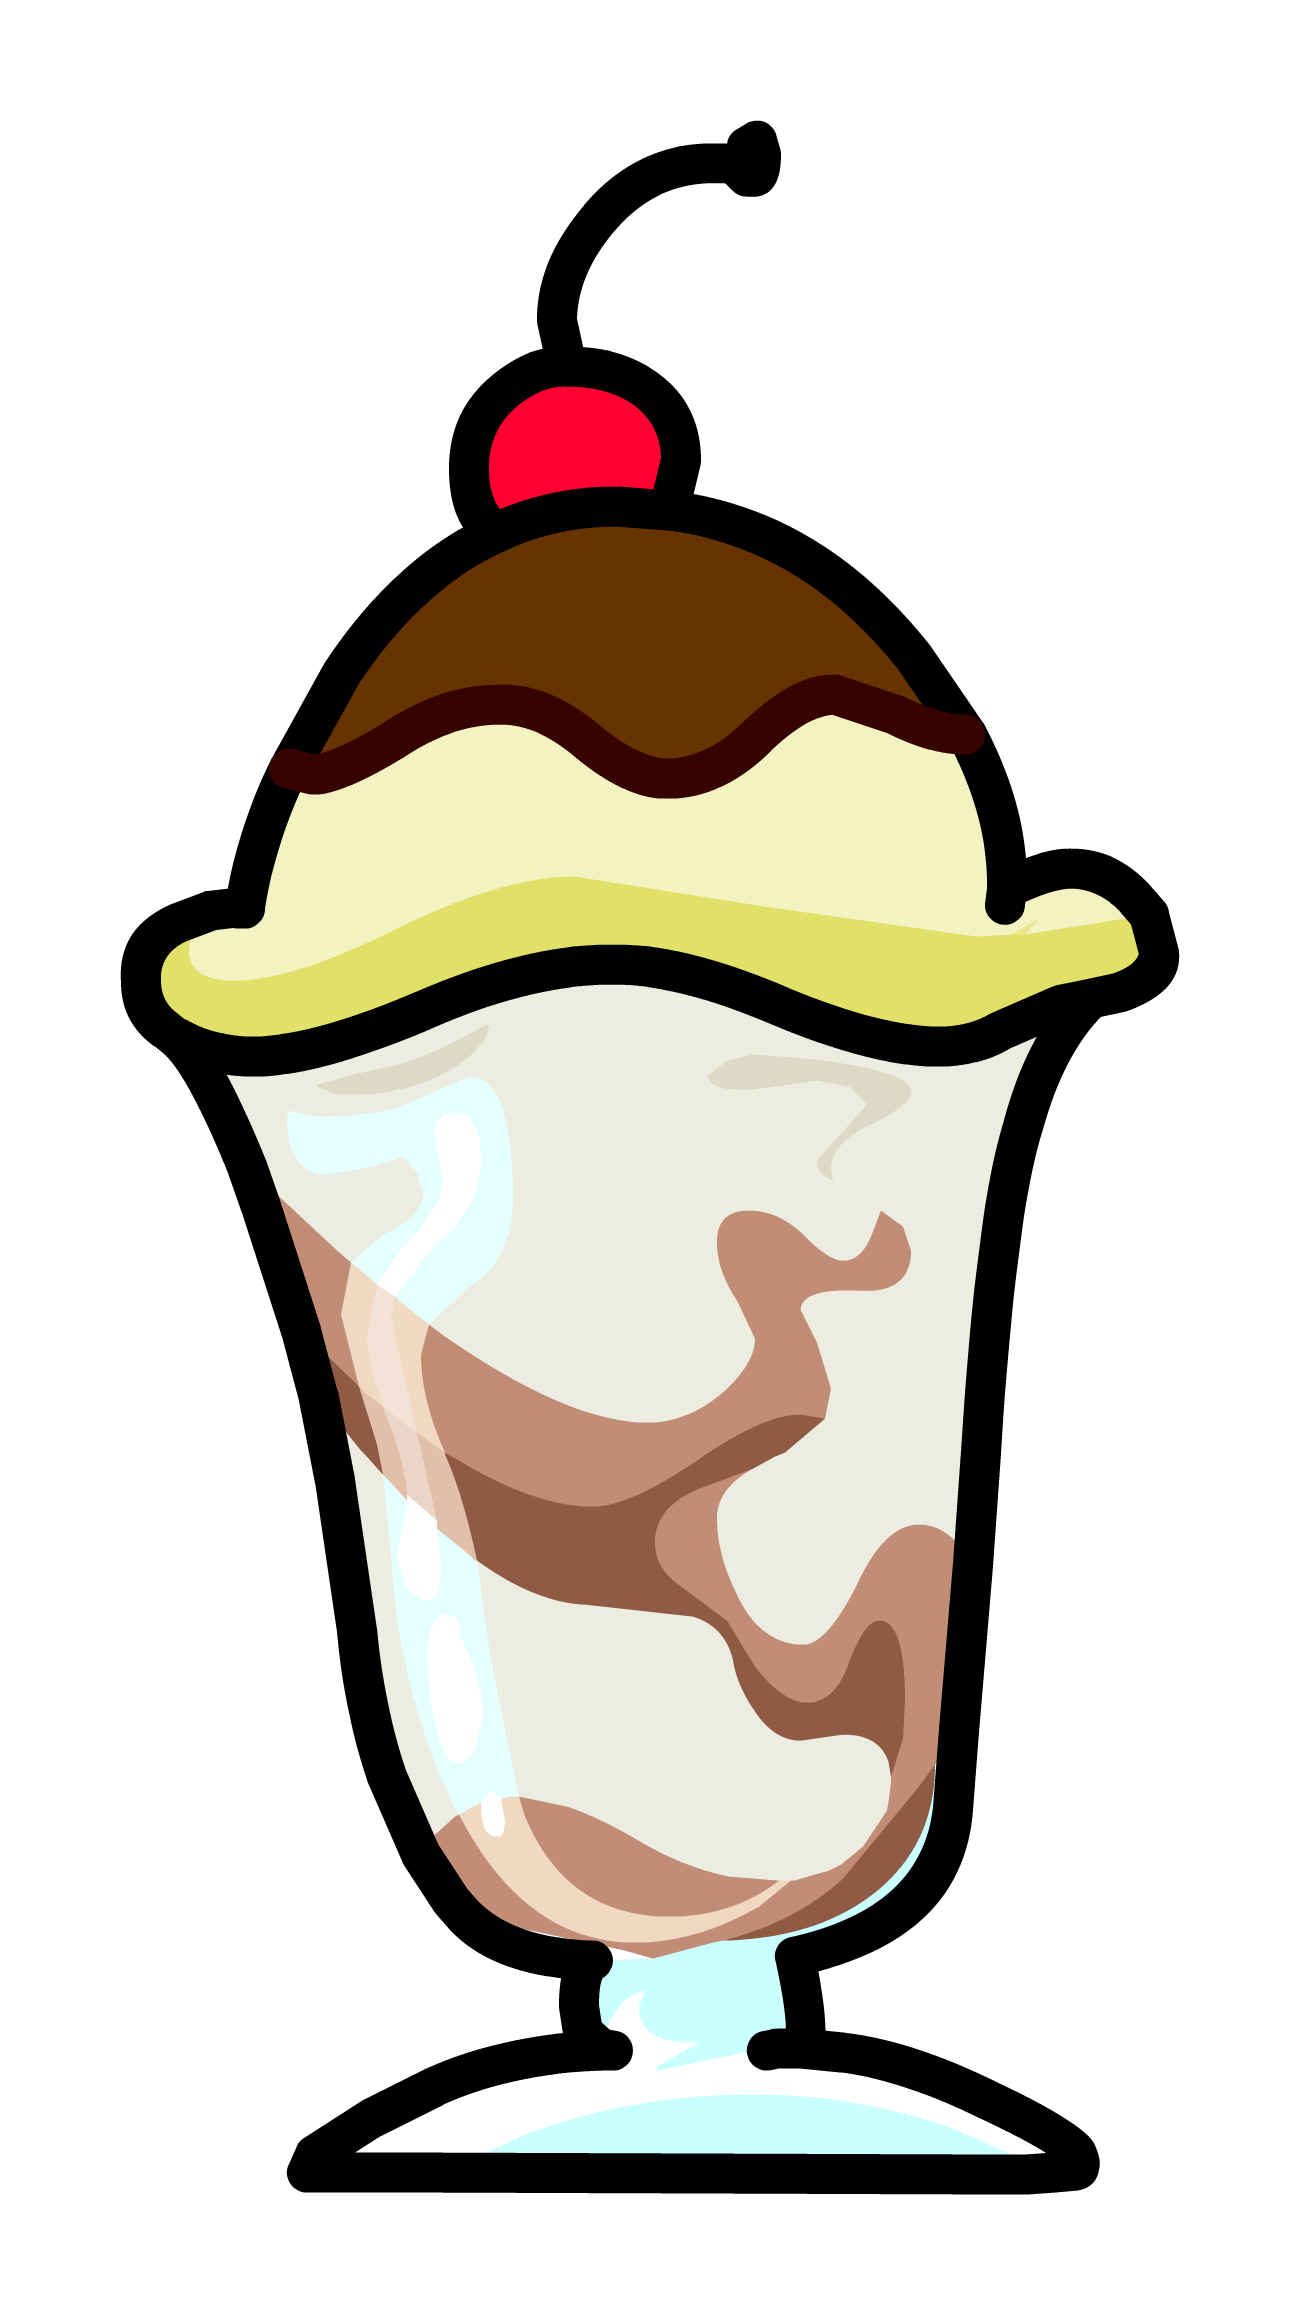 Ice Cream Sundae HD PNG Image High Quality PNG Image